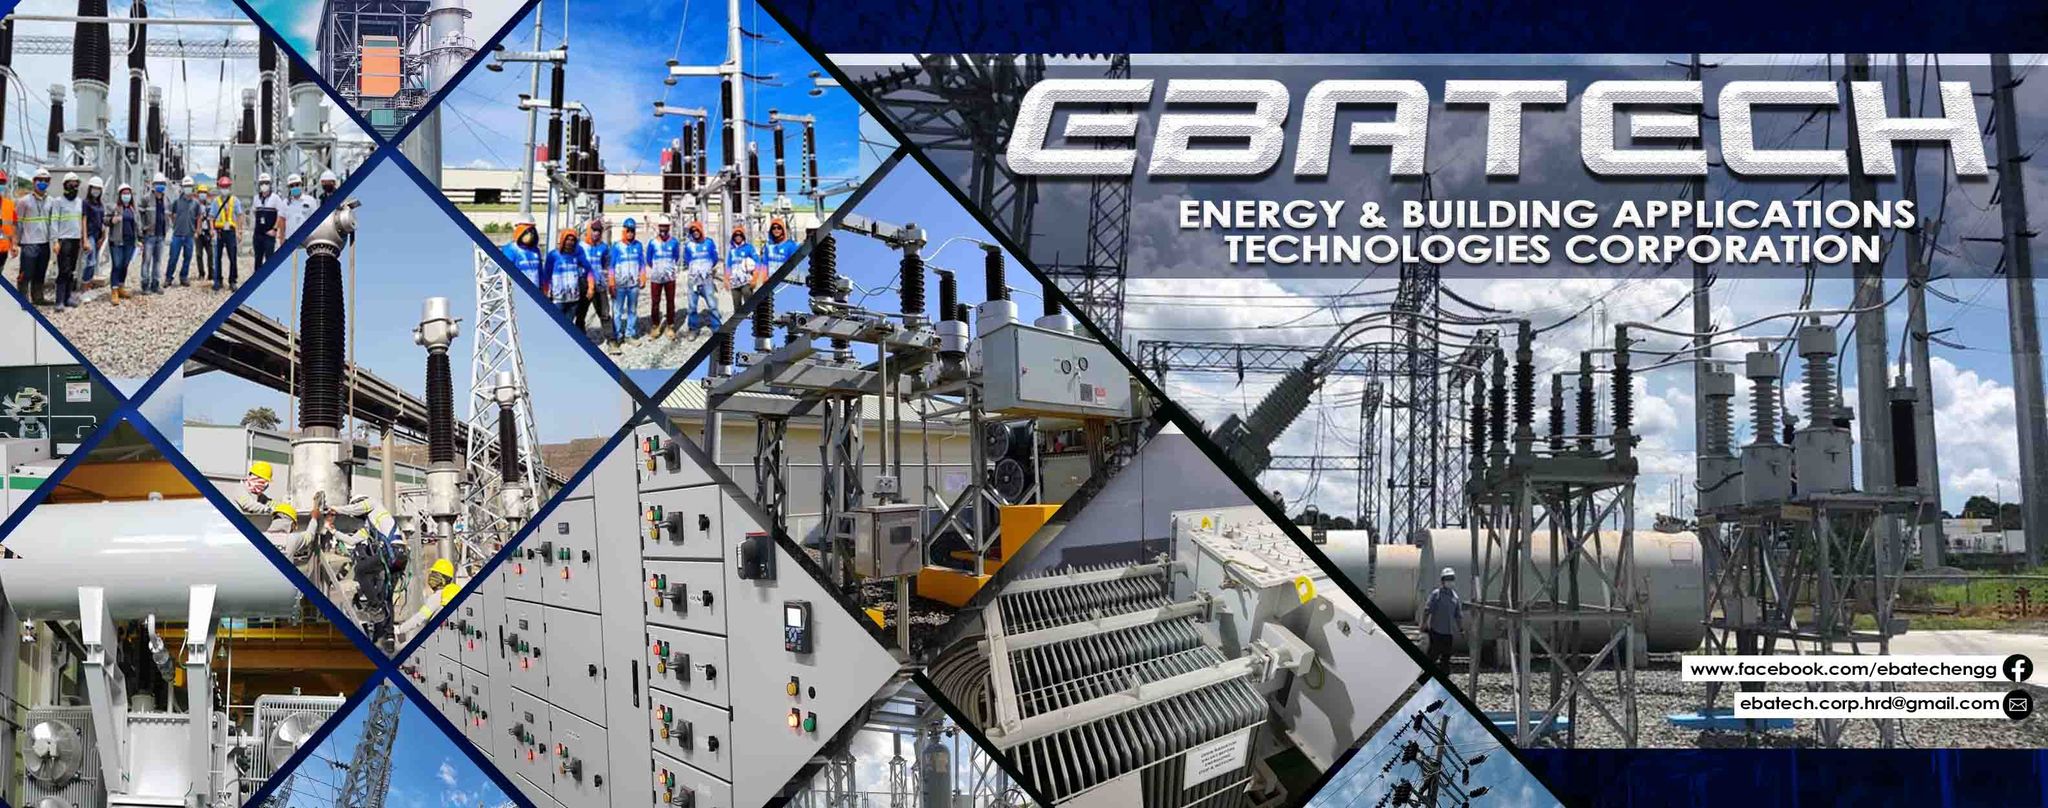 Energy and Building Applications Technologies Corporation